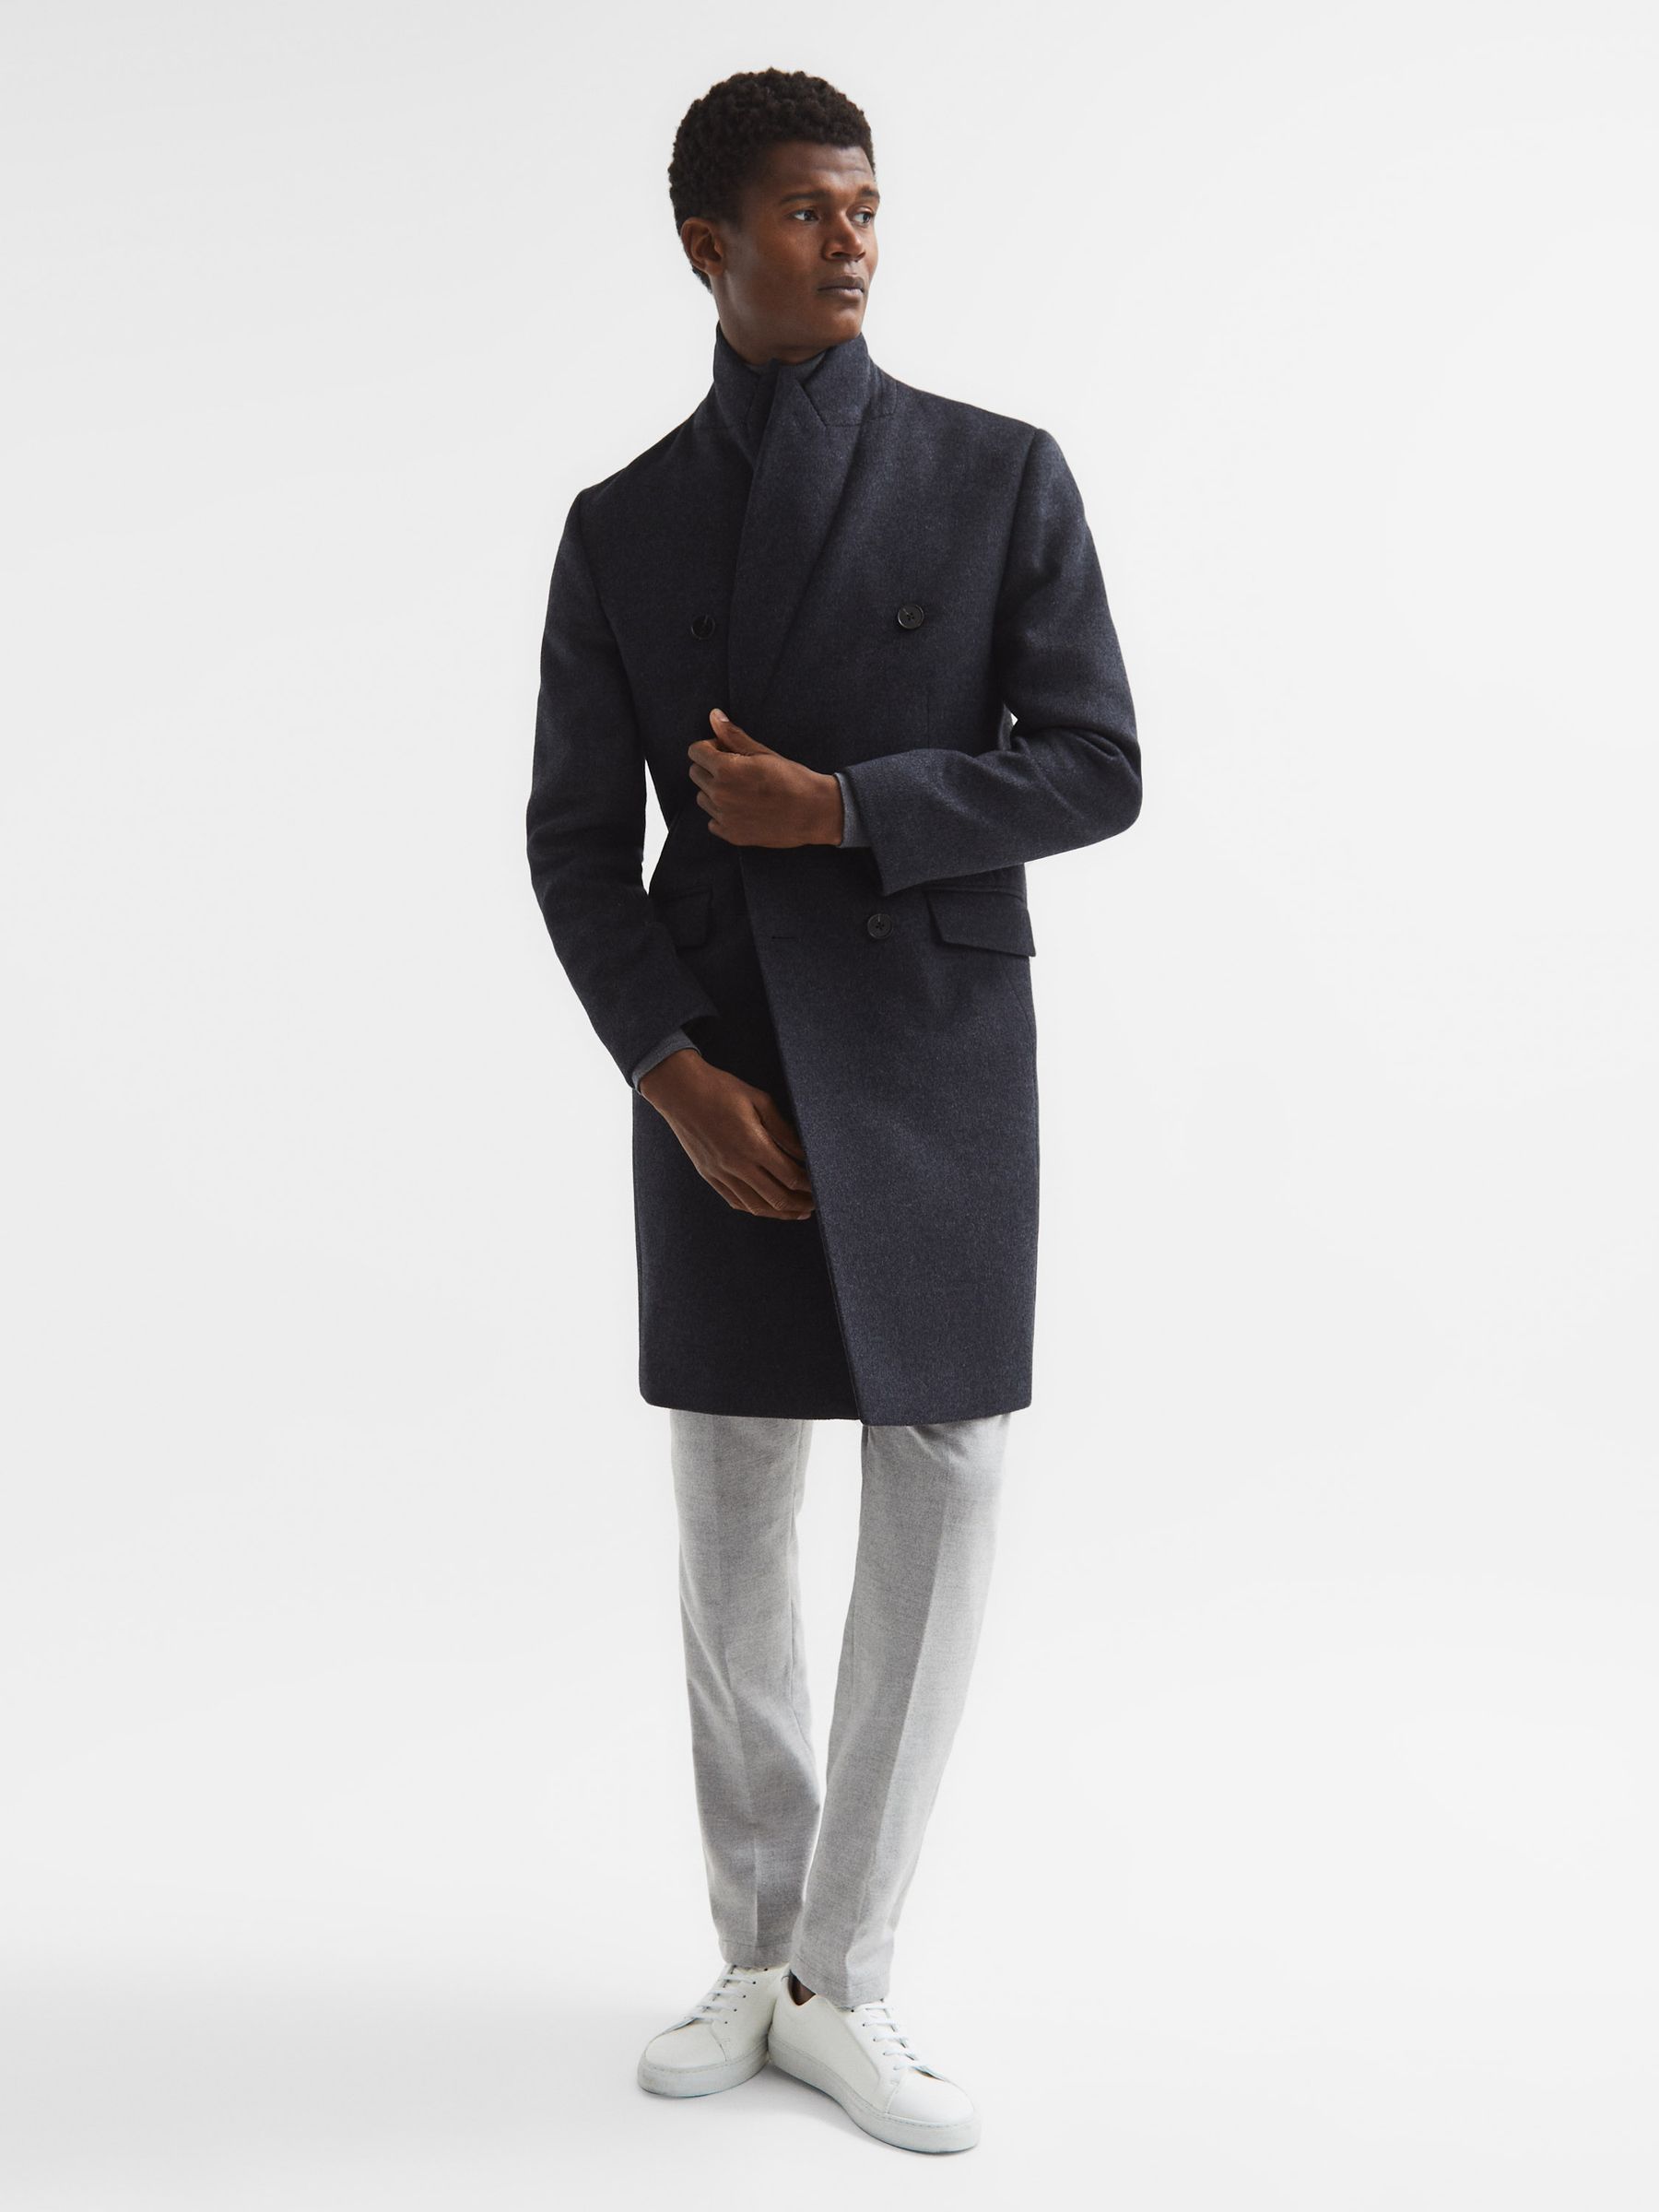 Reiss Reflection Double Breasted Long Wool Overcoat | REISS USA